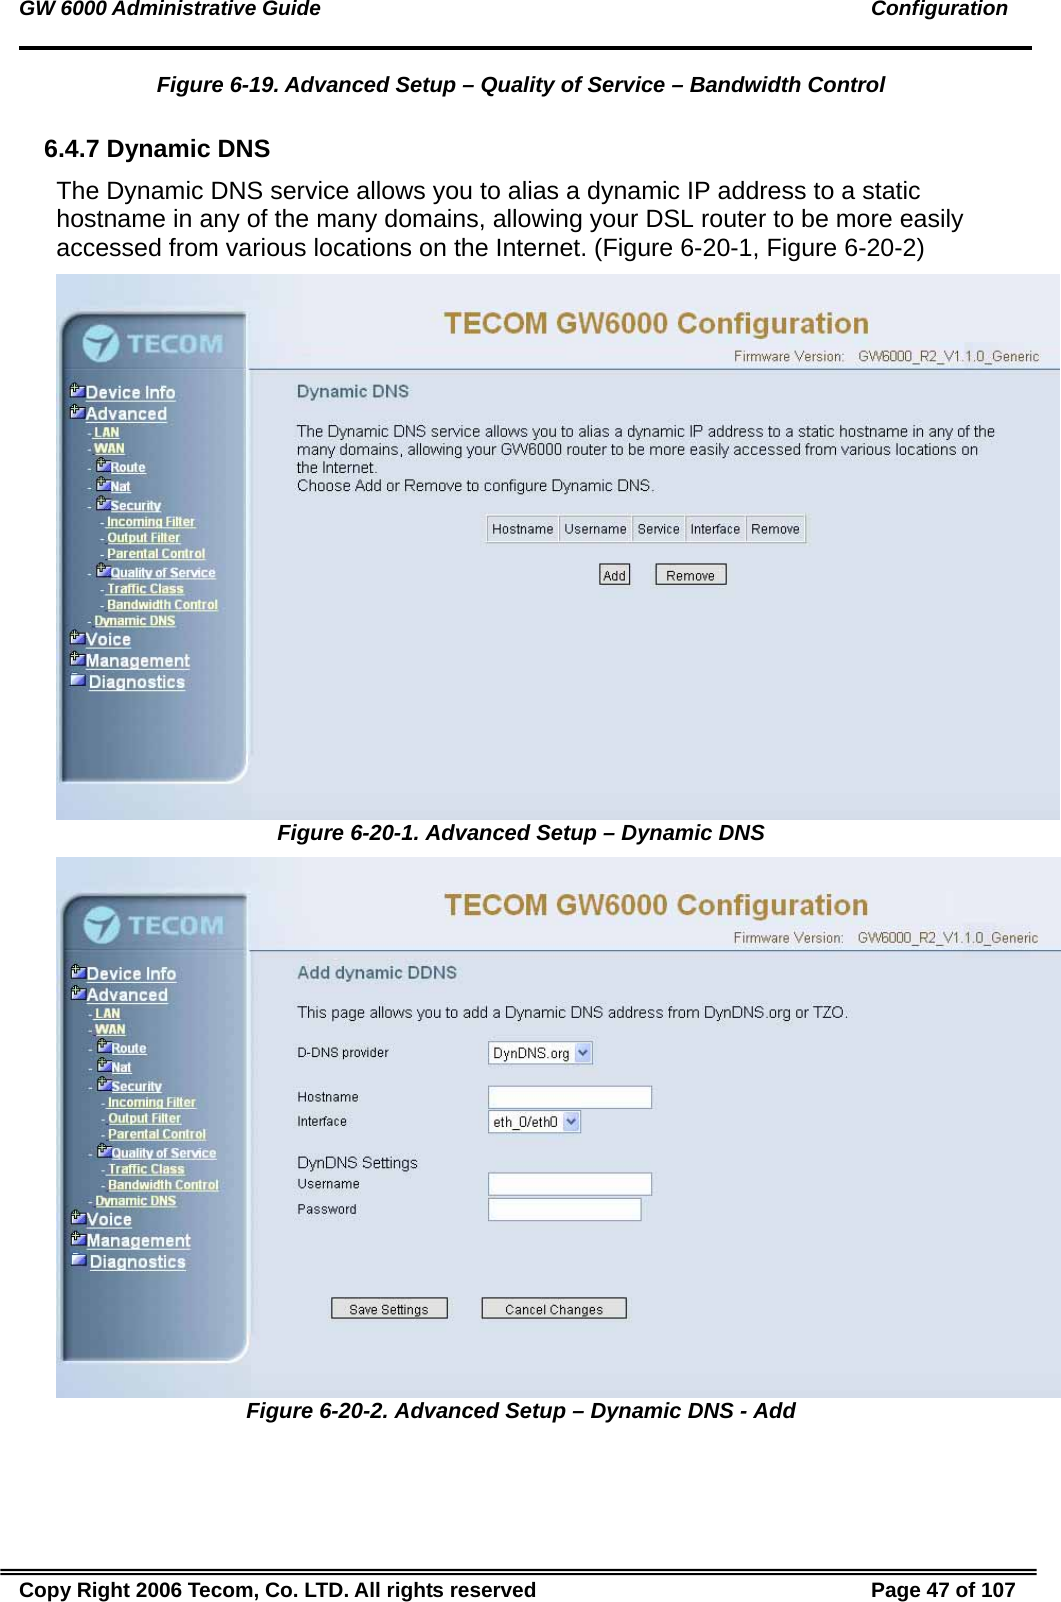 GW 6000 Administrative Guide                                                                                               Configuration Figure 6-19. Advanced Setup – Quality of Service – Bandwidth Control  6.4.7 Dynamic DNS The Dynamic DNS service allows you to alias a dynamic IP address to a static hostname in any of the many domains, allowing your DSL router to be more easily accessed from various locations on the Internet. (Figure 6-20-1, Figure 6-20-2)  Figure 6-20-1. Advanced Setup – Dynamic DNS  Figure 6-20-2. Advanced Setup – Dynamic DNS - Add Copy Right 2006 Tecom, Co. LTD. All rights reserved  Page 47 of 107 